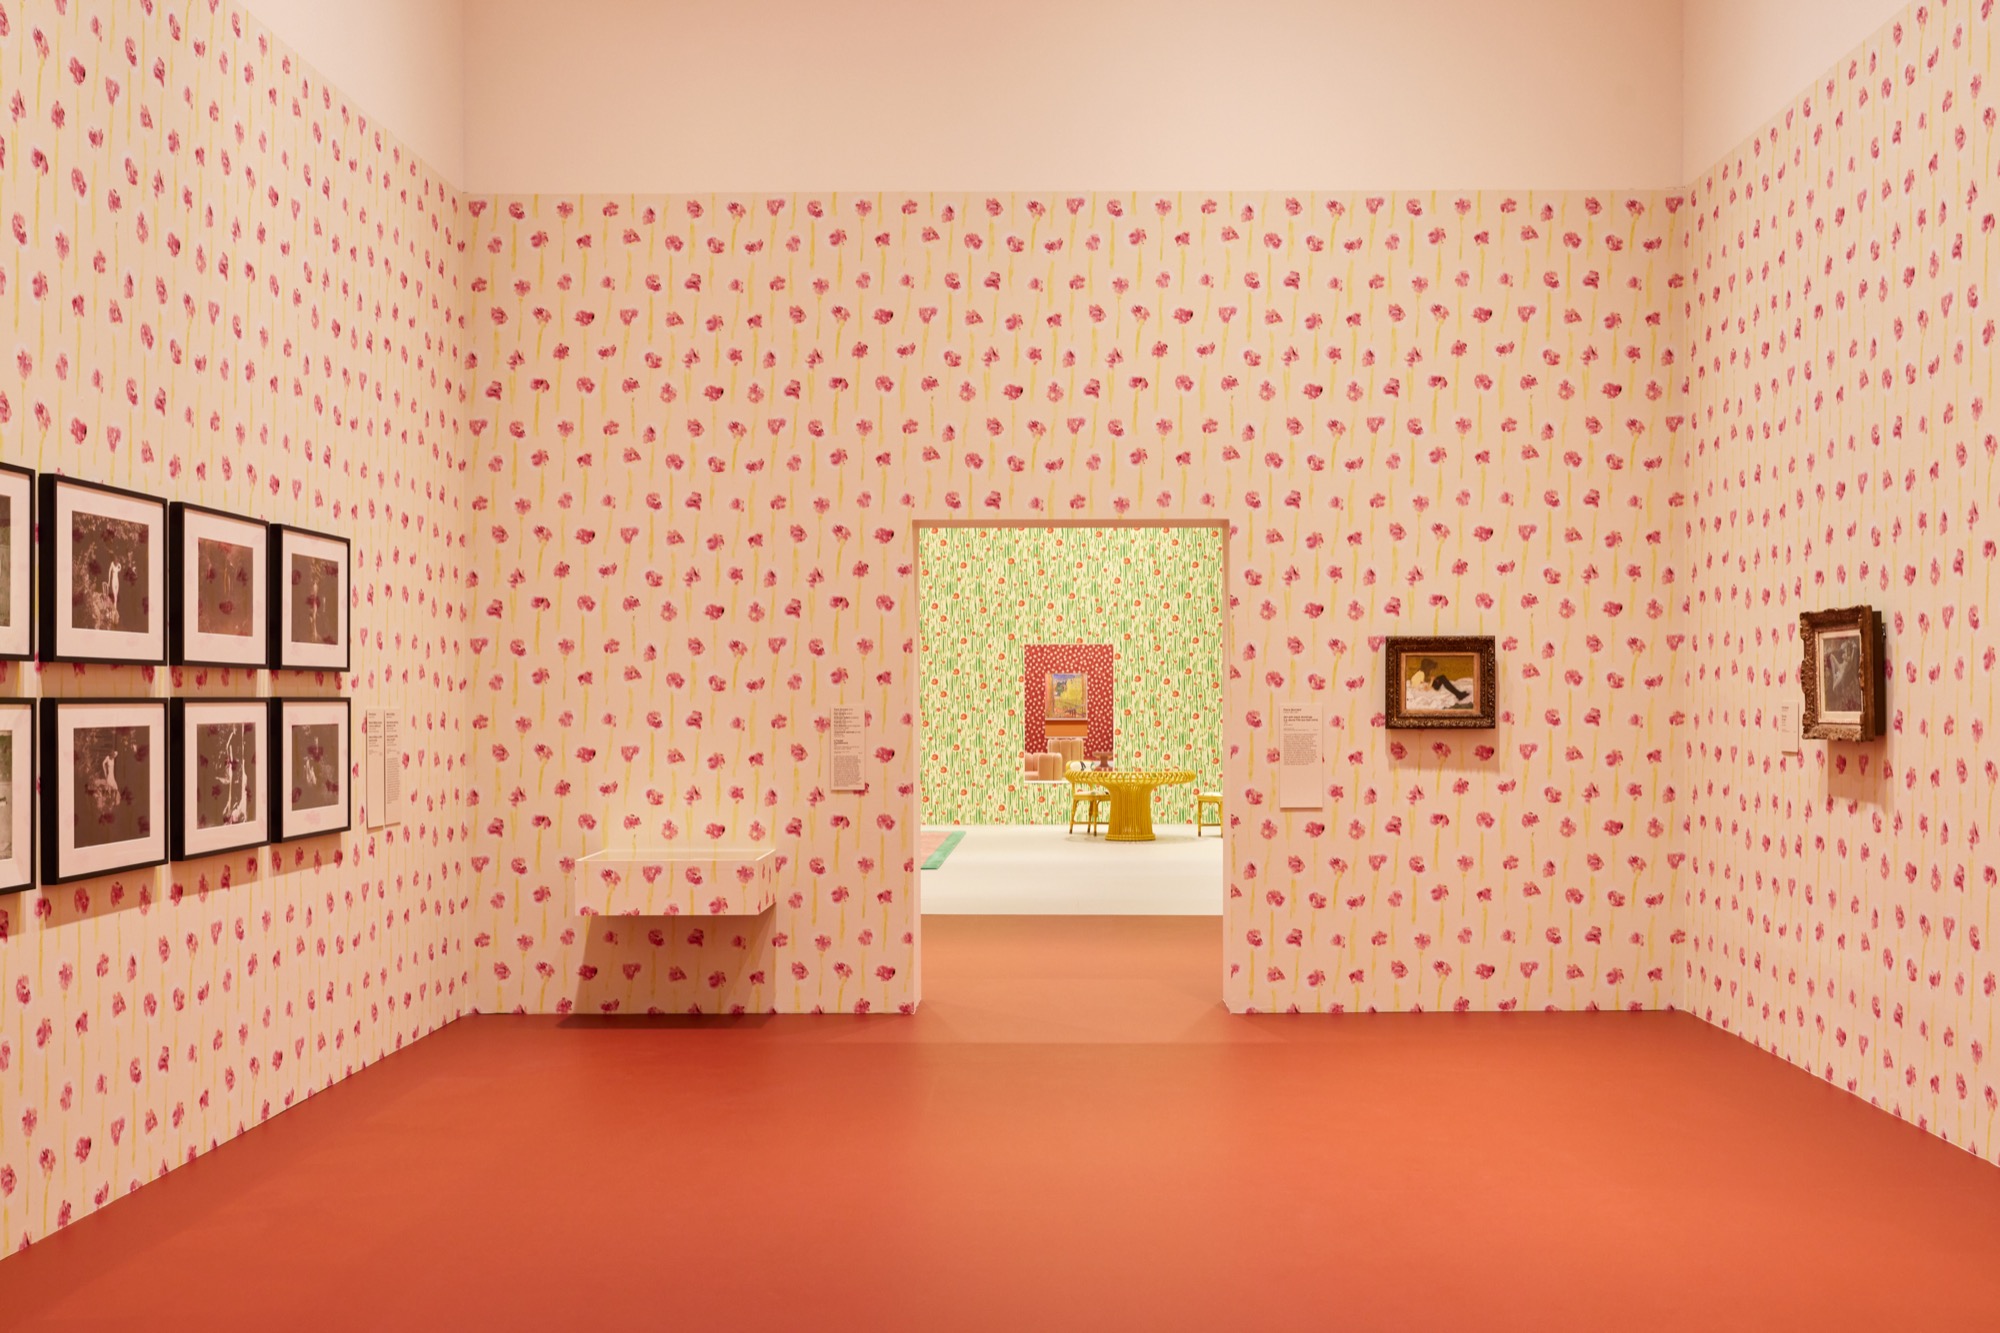 Installation view of Pierre Bonnard: Designed by India Mahdavi on display from 9 June – 8 October 2023 at NGV International, Melbourne. Photo: Lillie Thompson